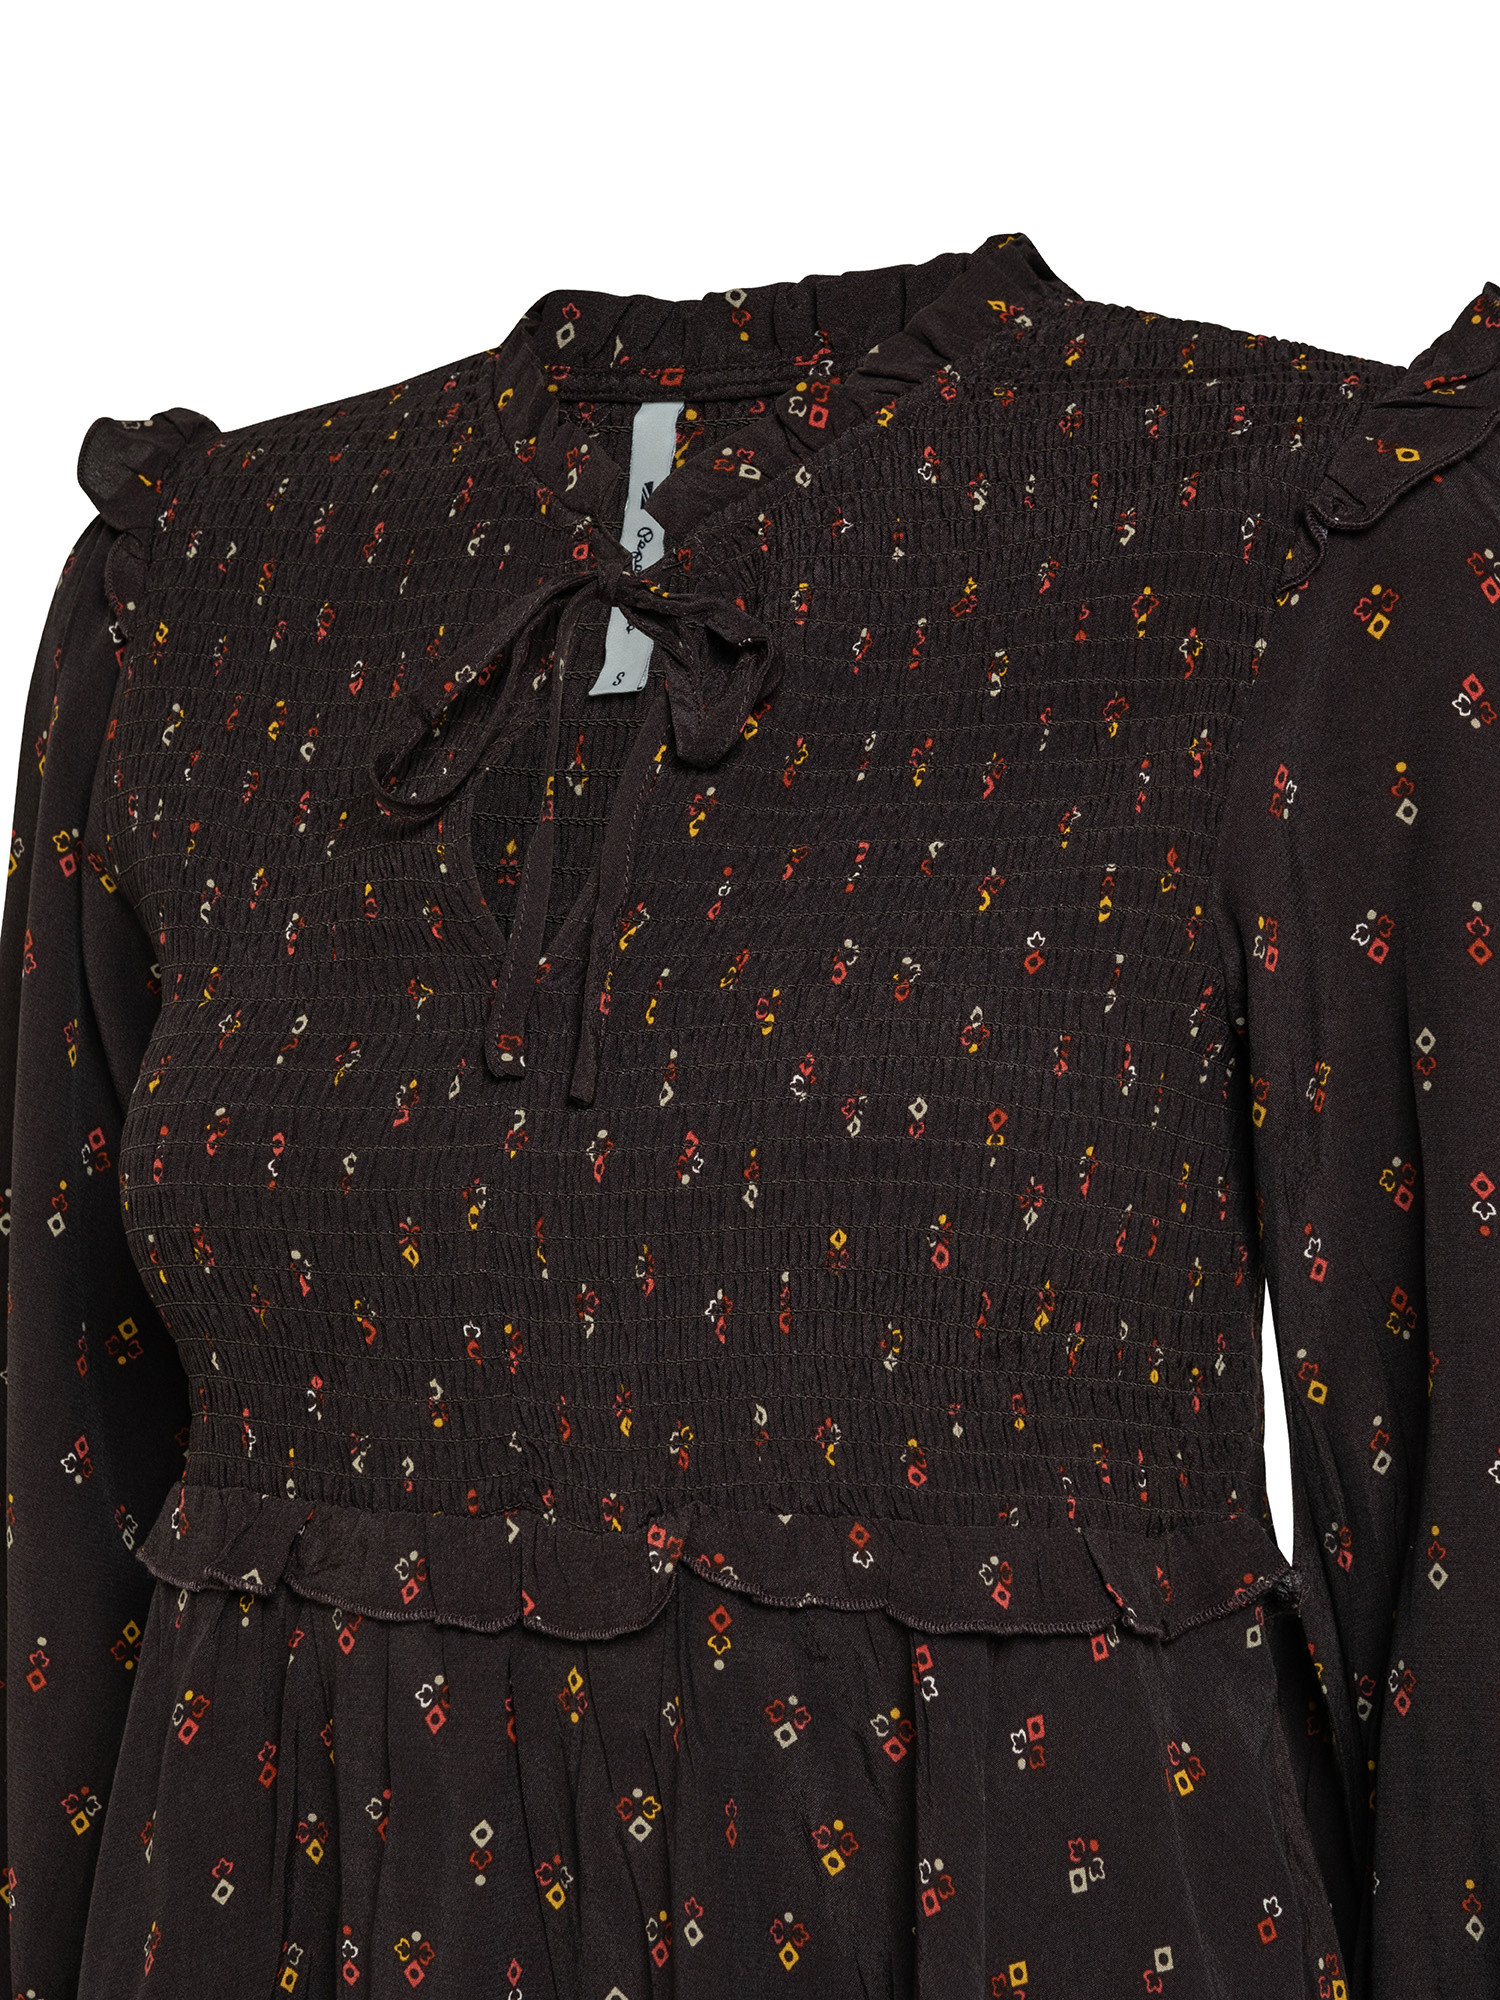 Nany honeycomb blouse, Brown, large image number 2